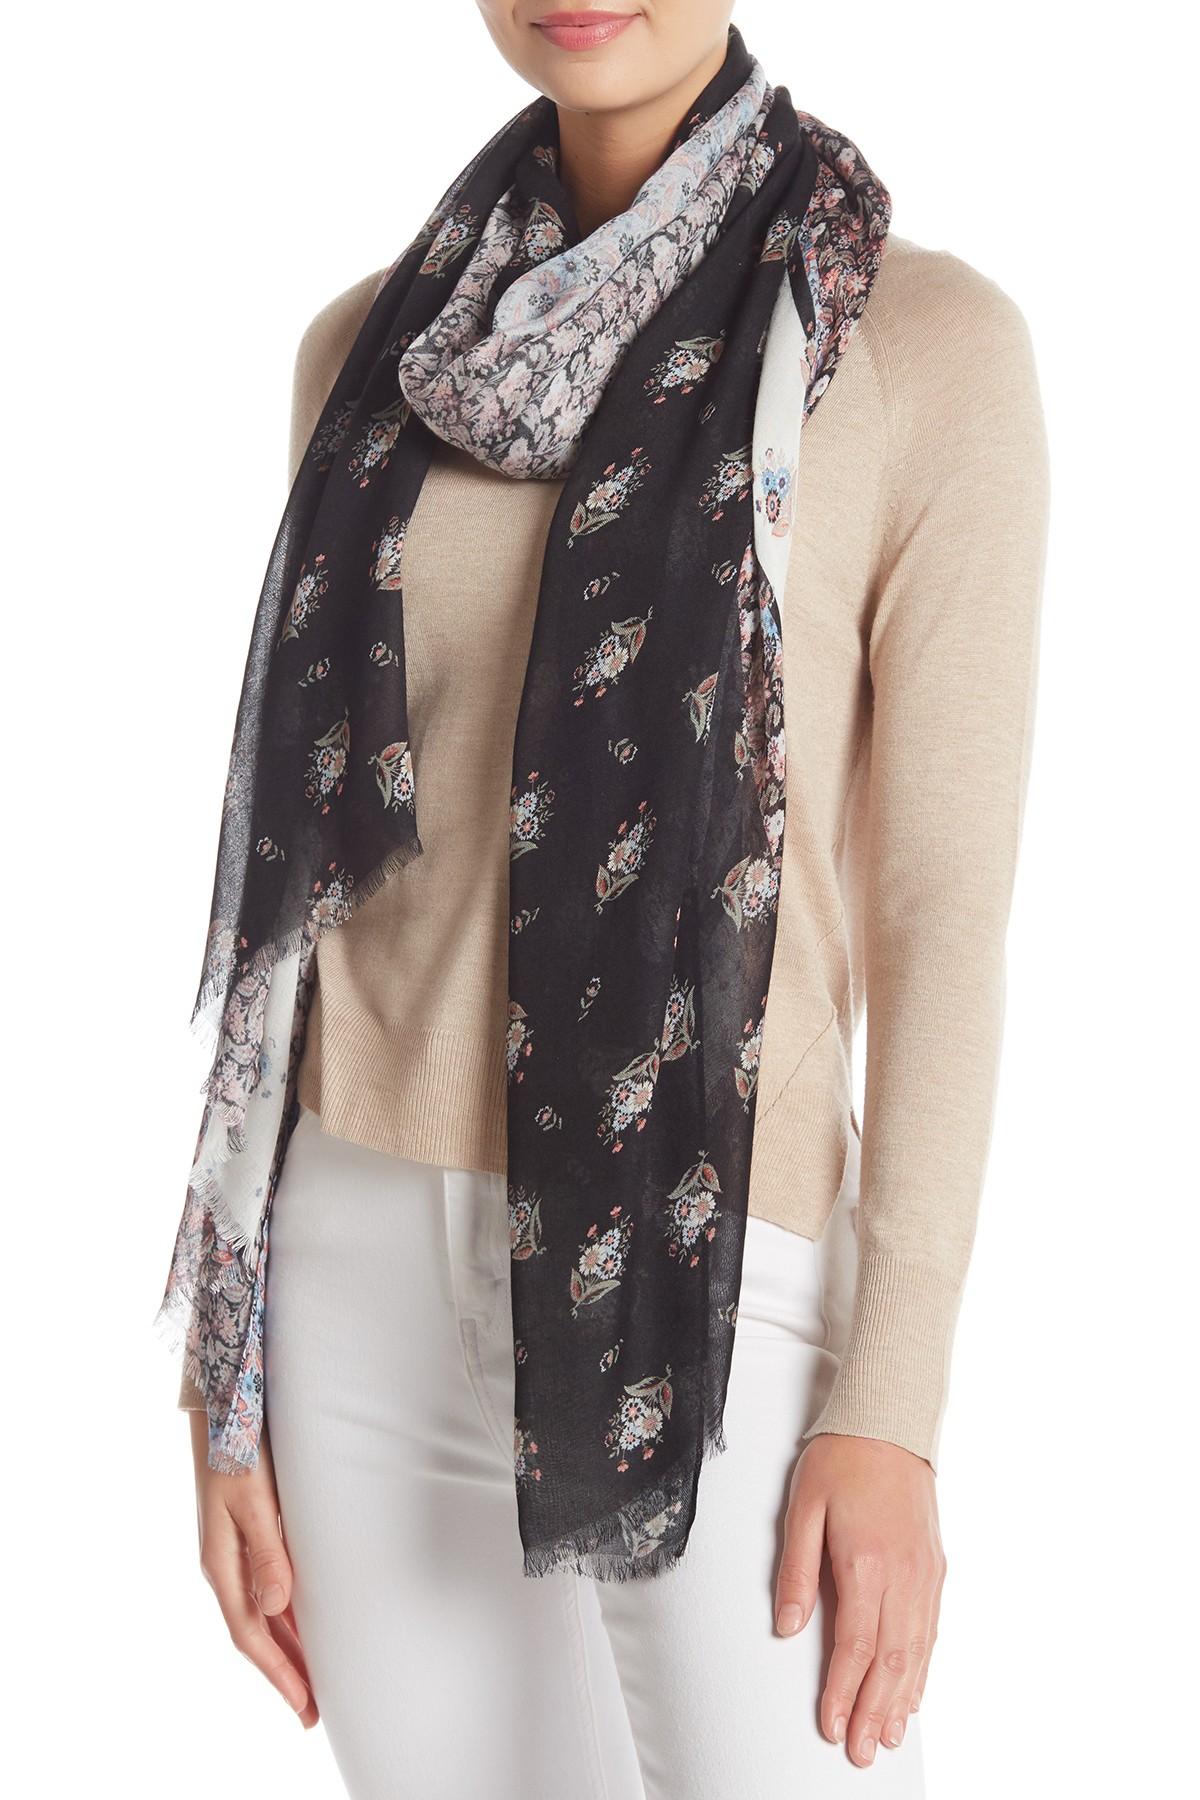 Rebecca Minkoff Ditsy Floral Oblong Scarf in Black - Lyst